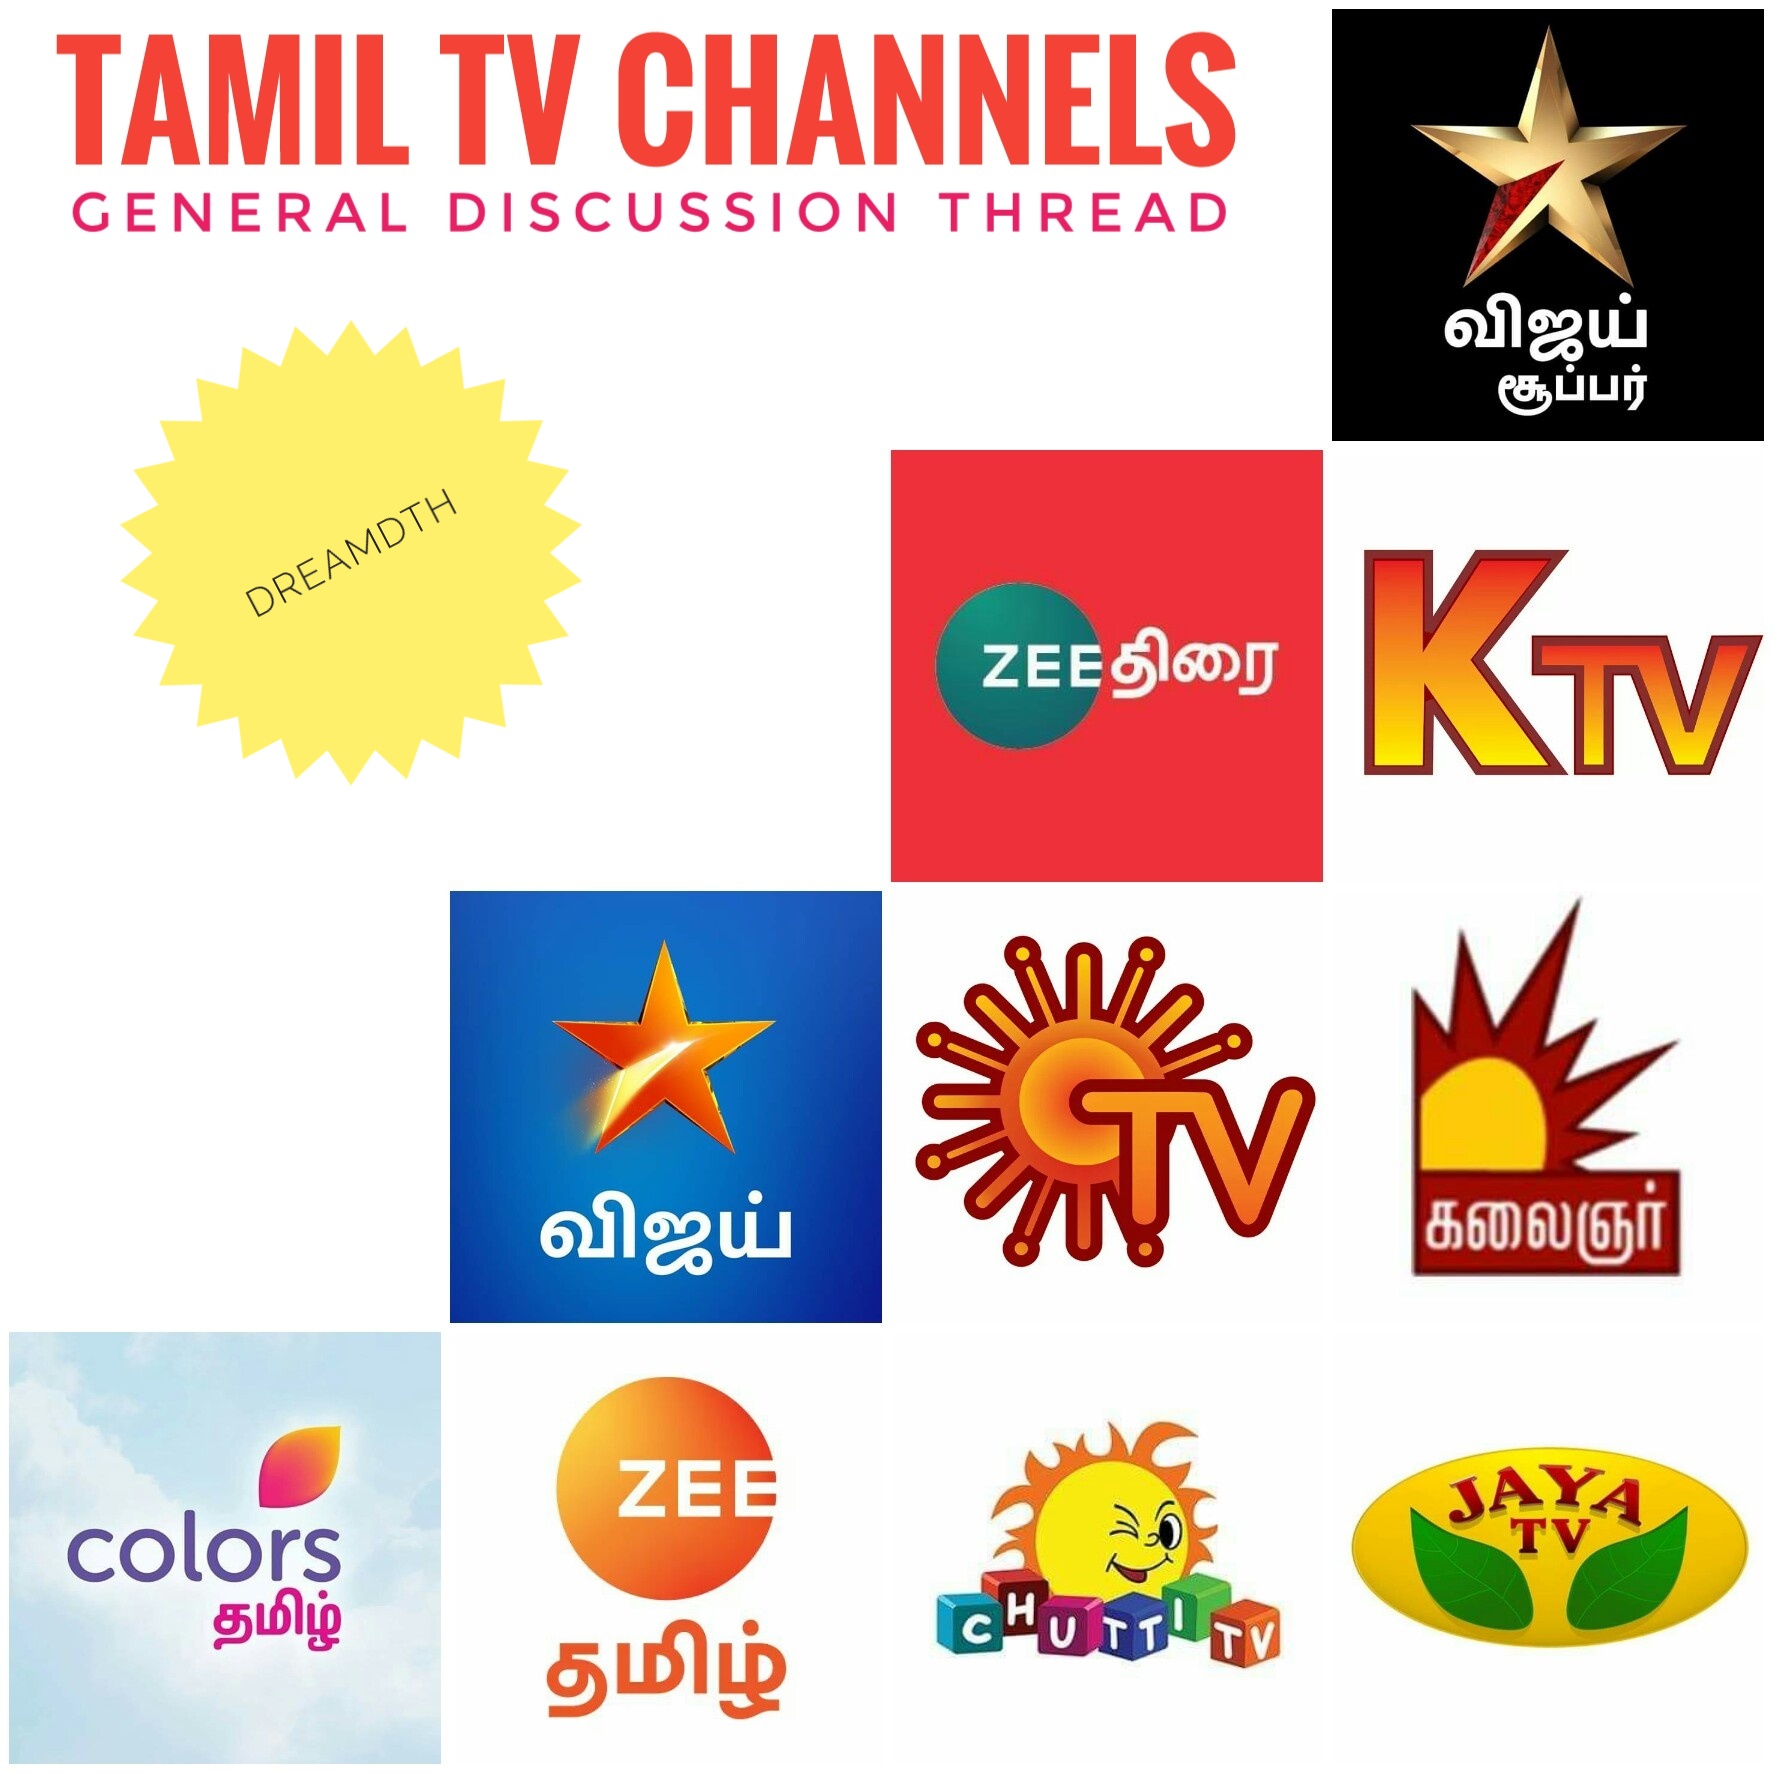 Discussion - General Discussion about Tamil TV channels-Current and